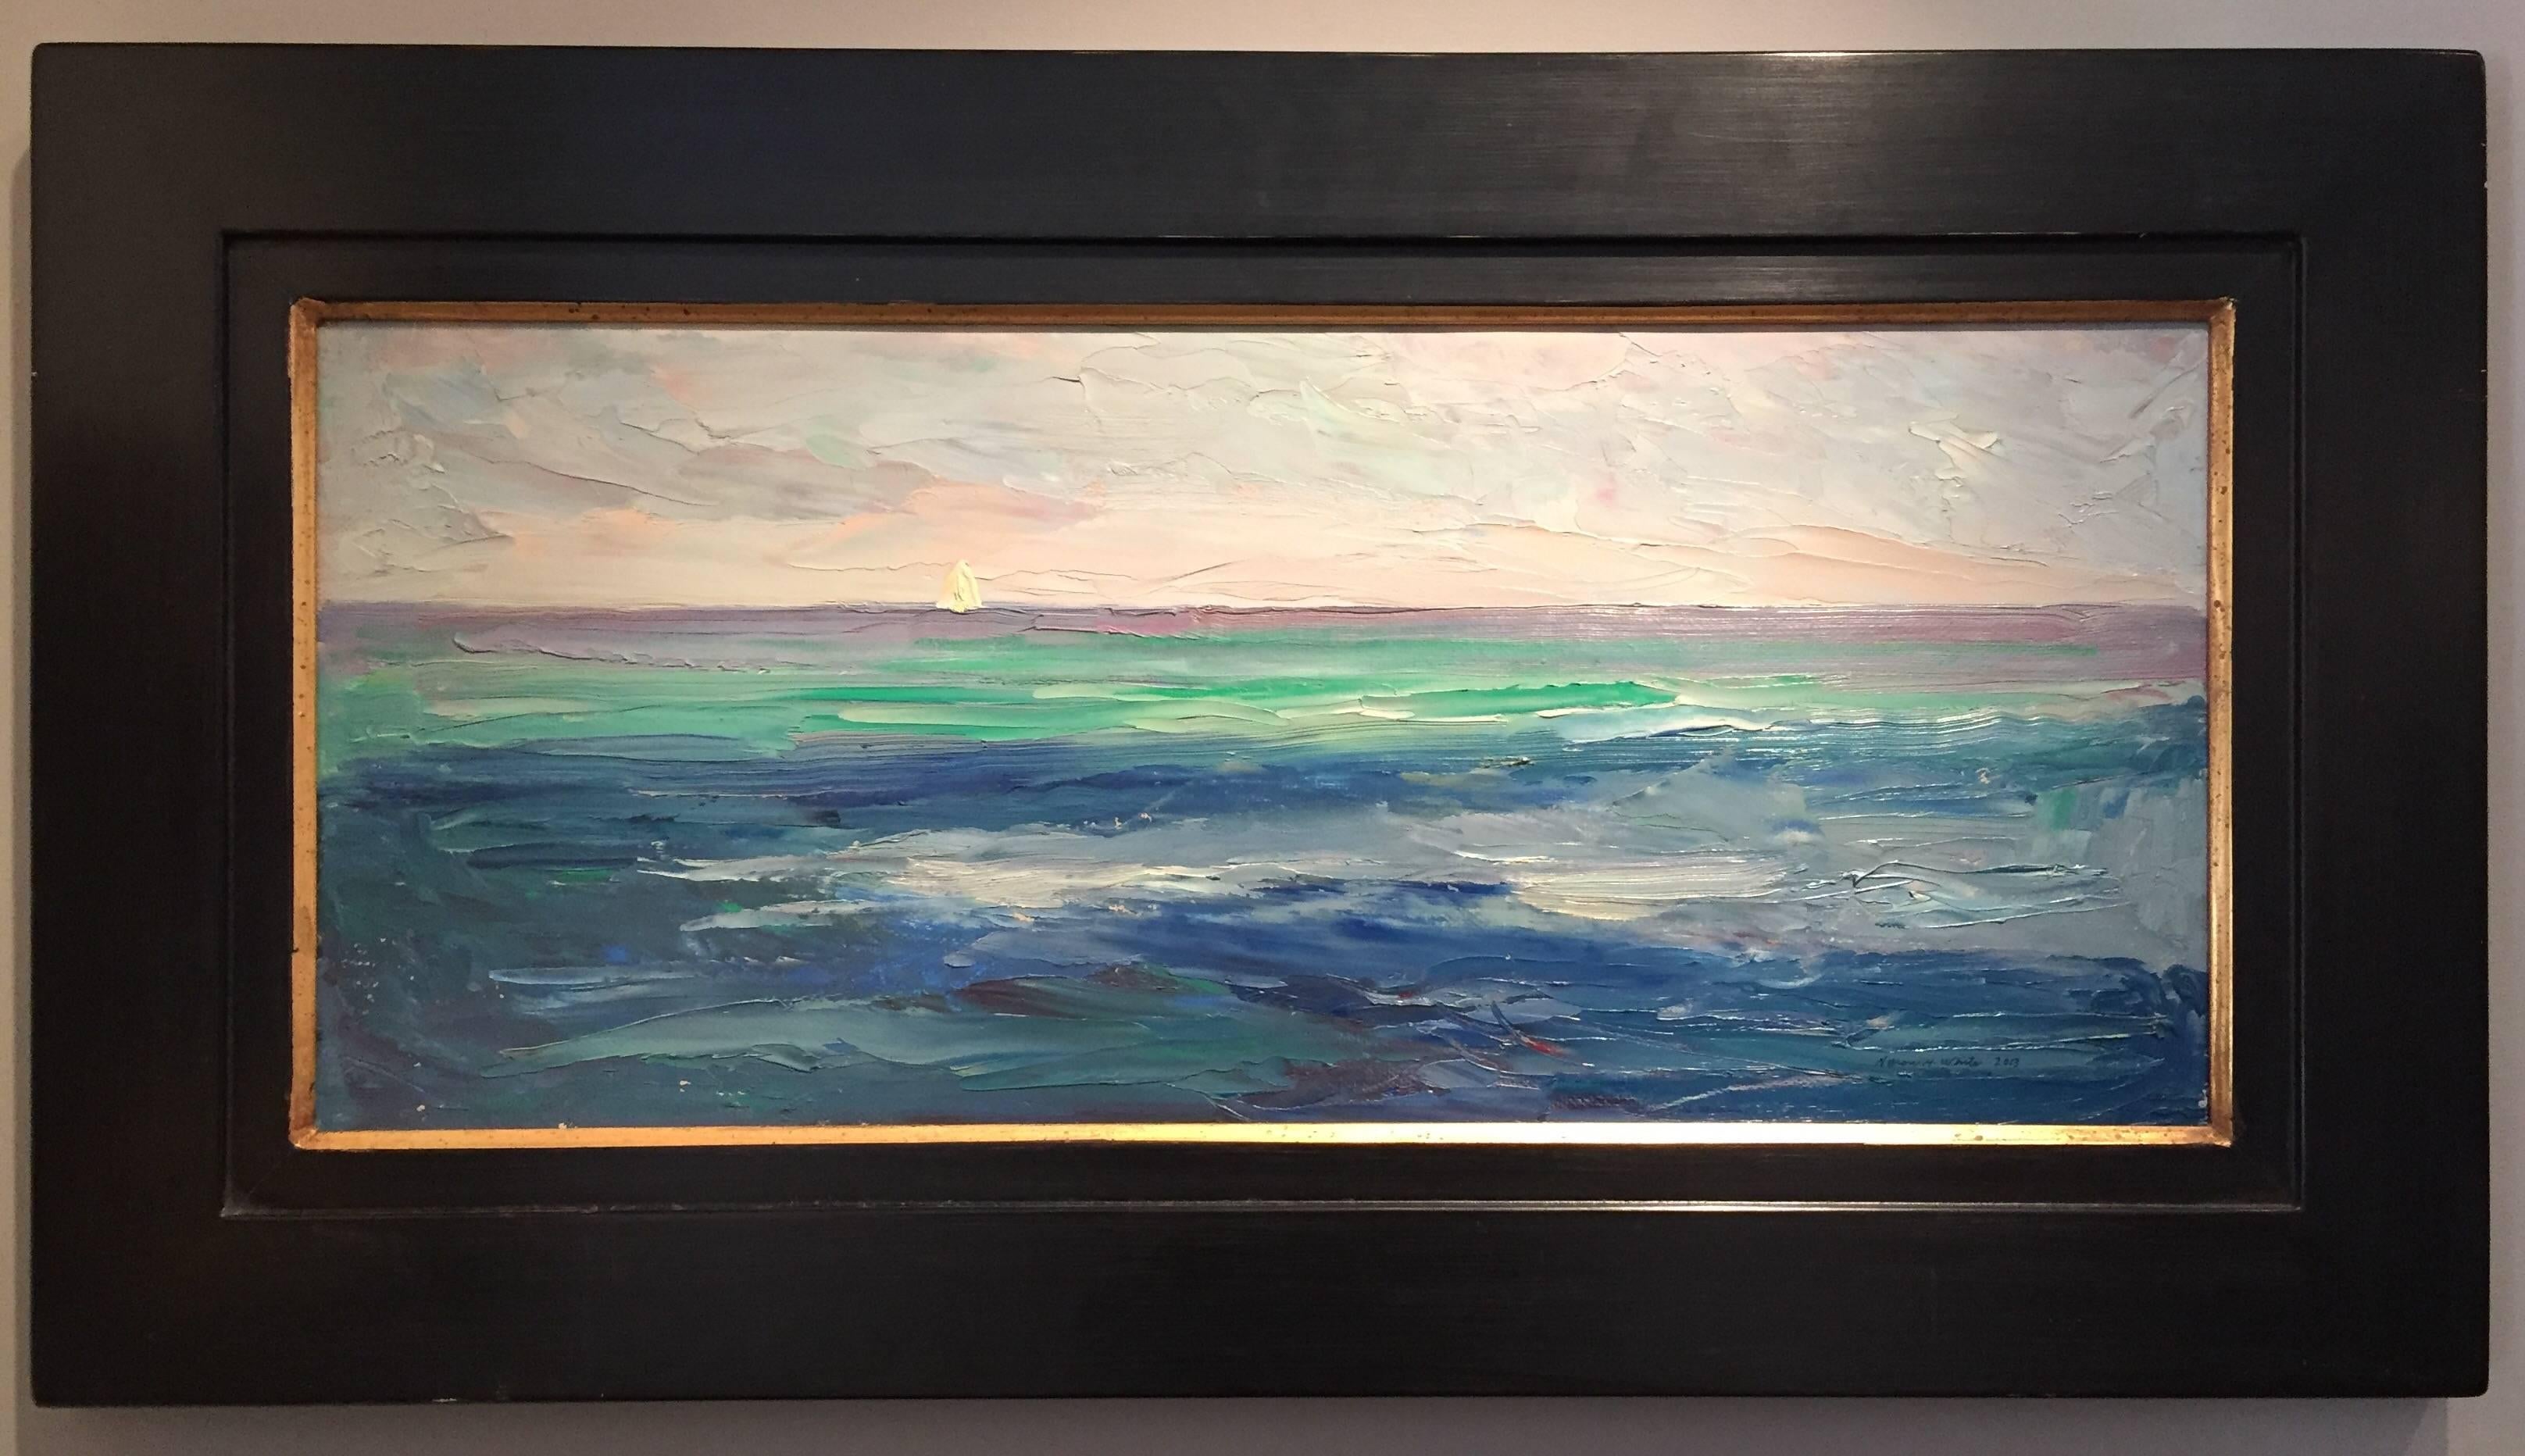 Sea and Sky, Bahamas - Painting by Nelson H. White